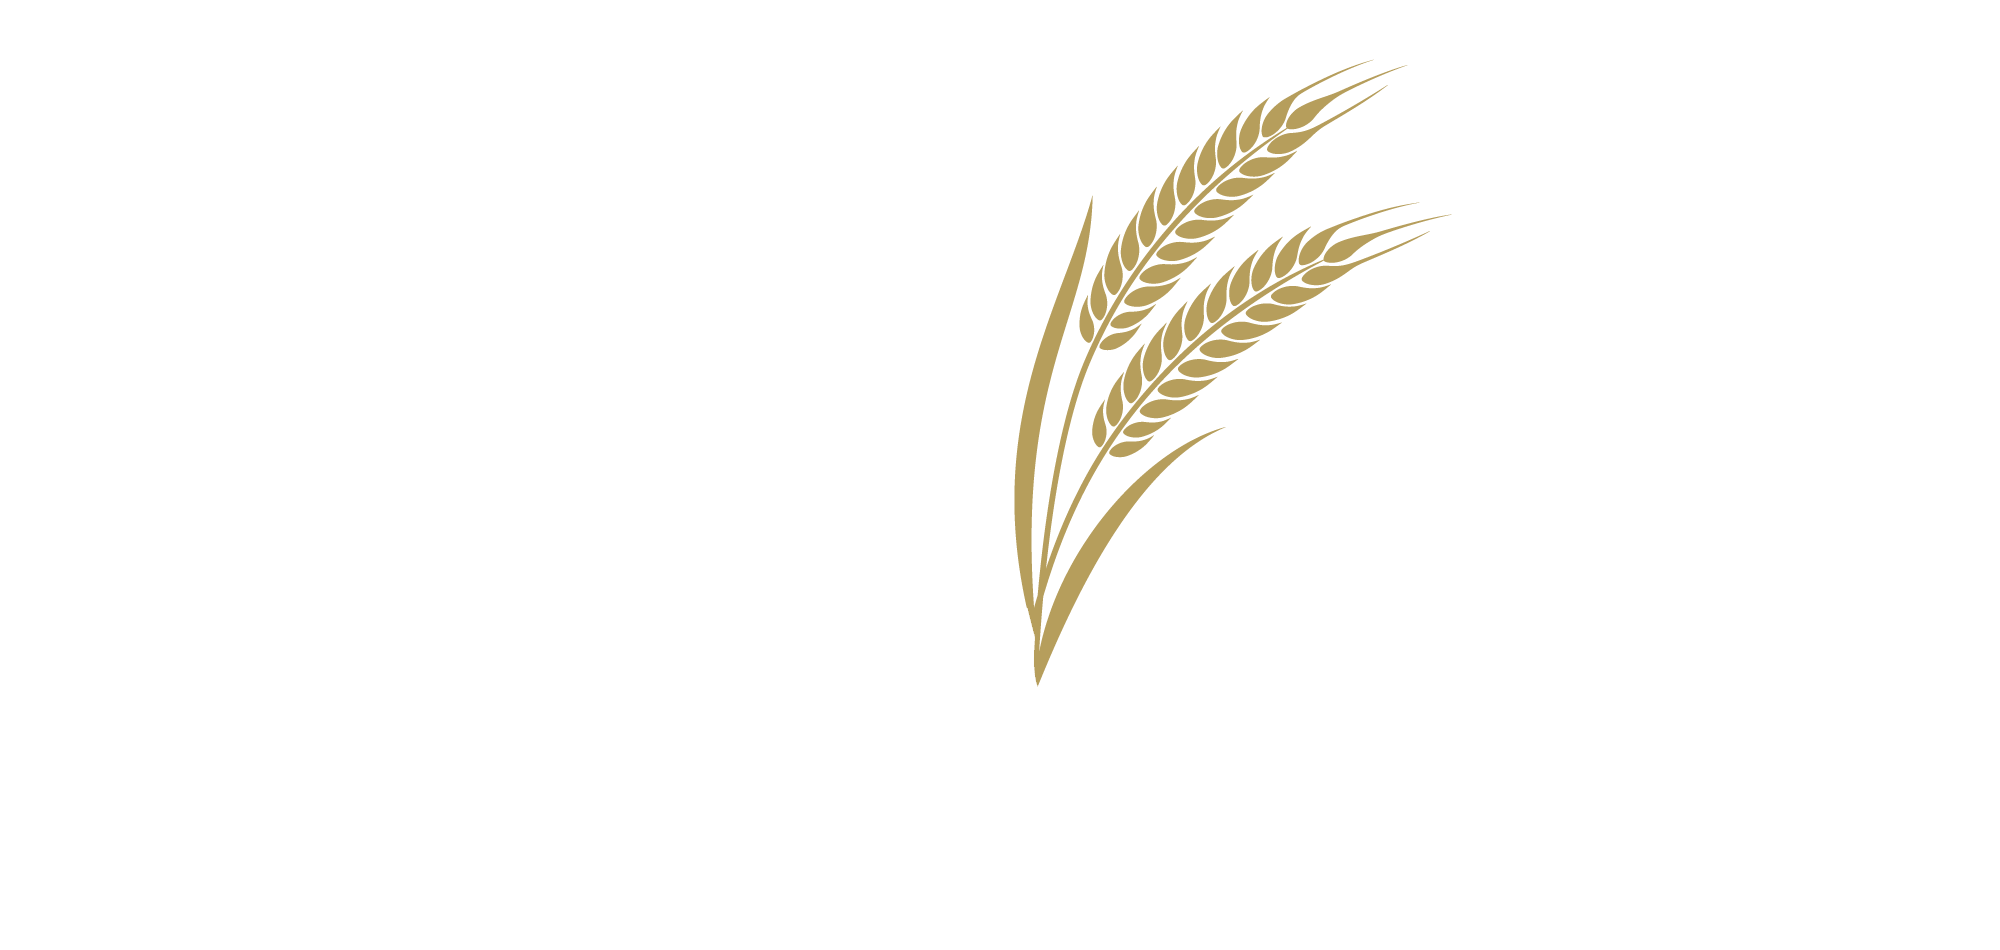 Tully Mill Cottages